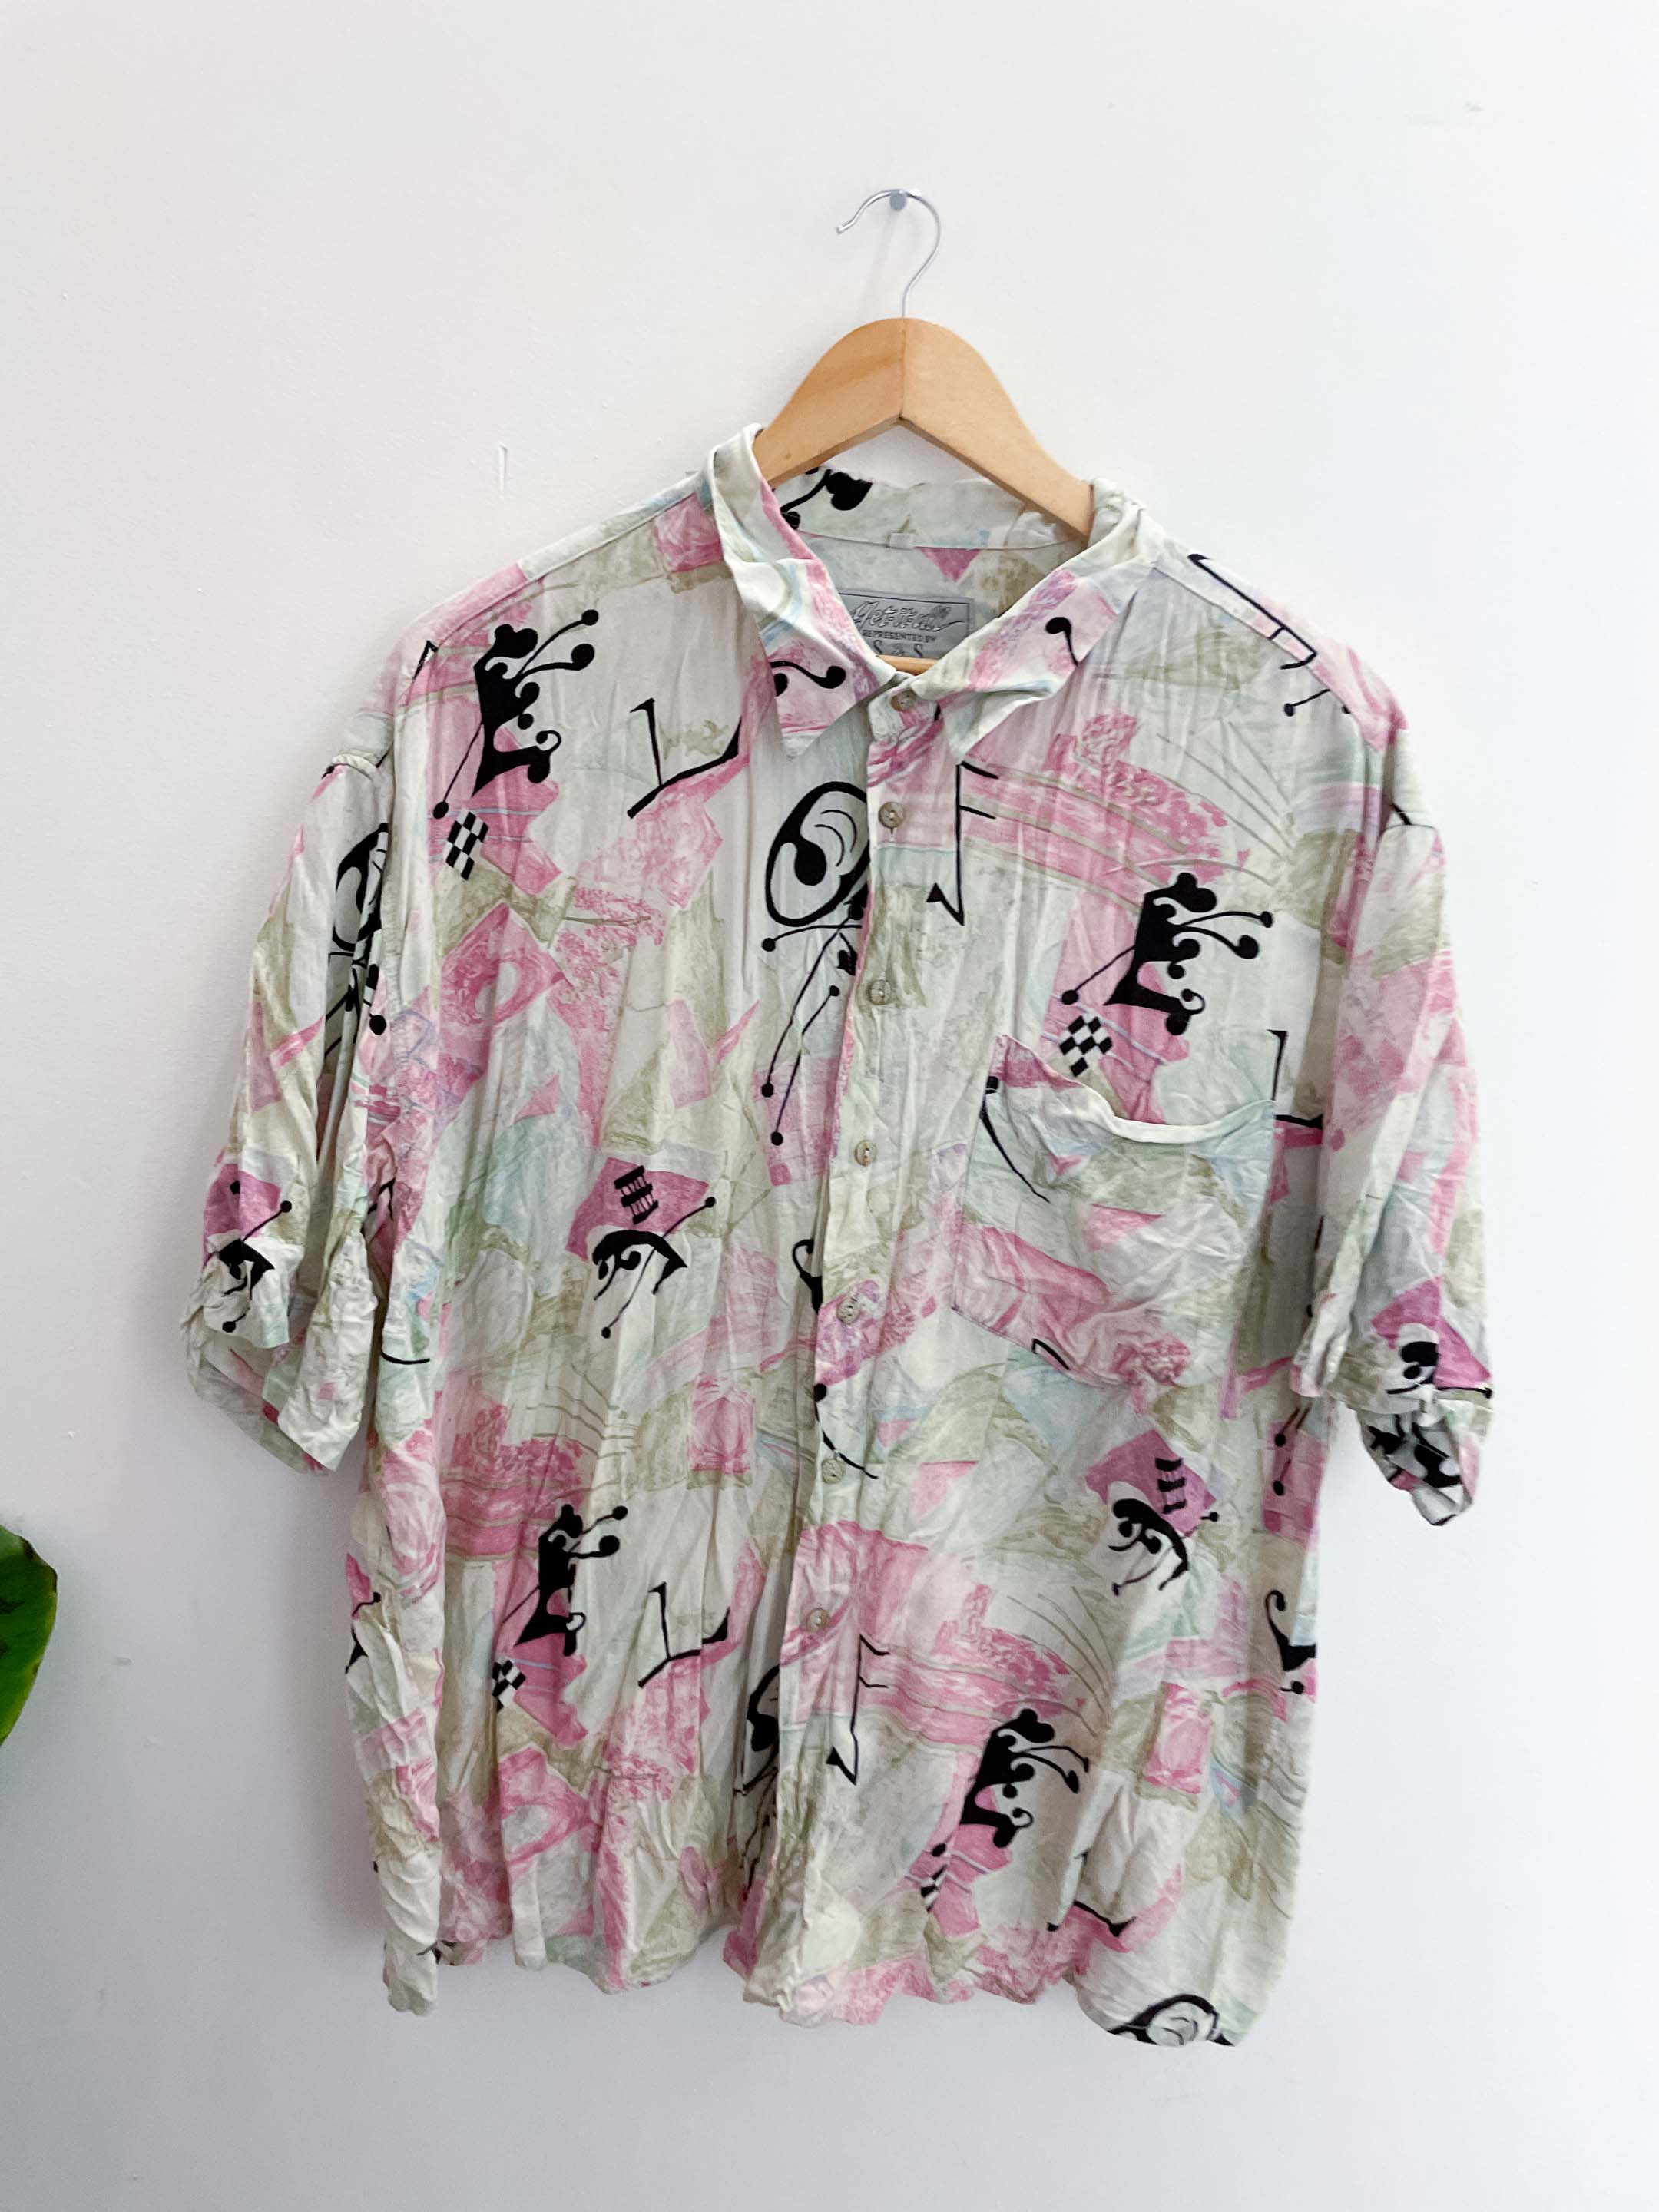 Vintage get it all multi abstract pattern mens short sleeve shirt size XXL